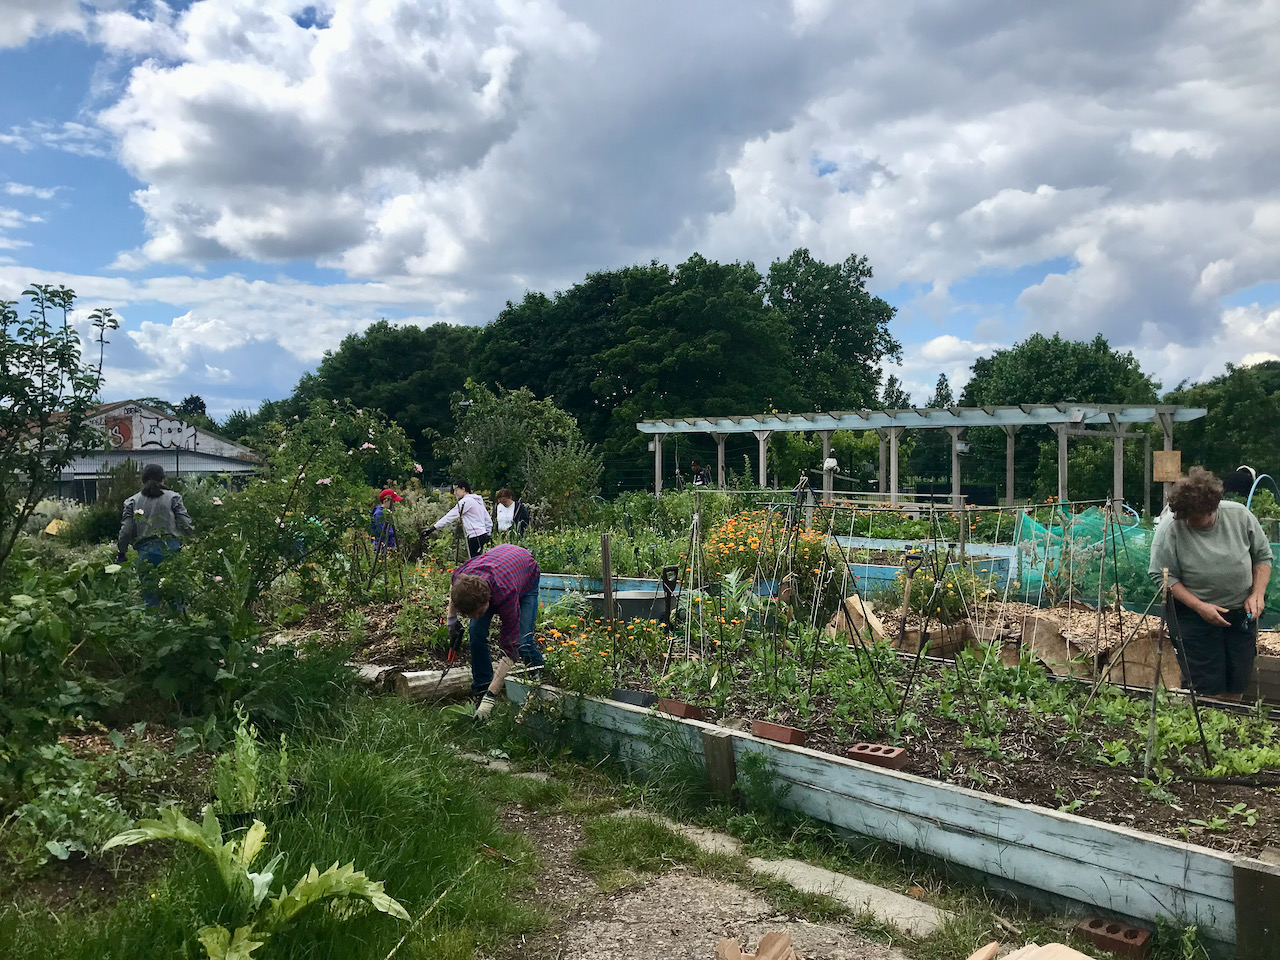 A volunteer day at a community garden. People are tending to the garden beds.